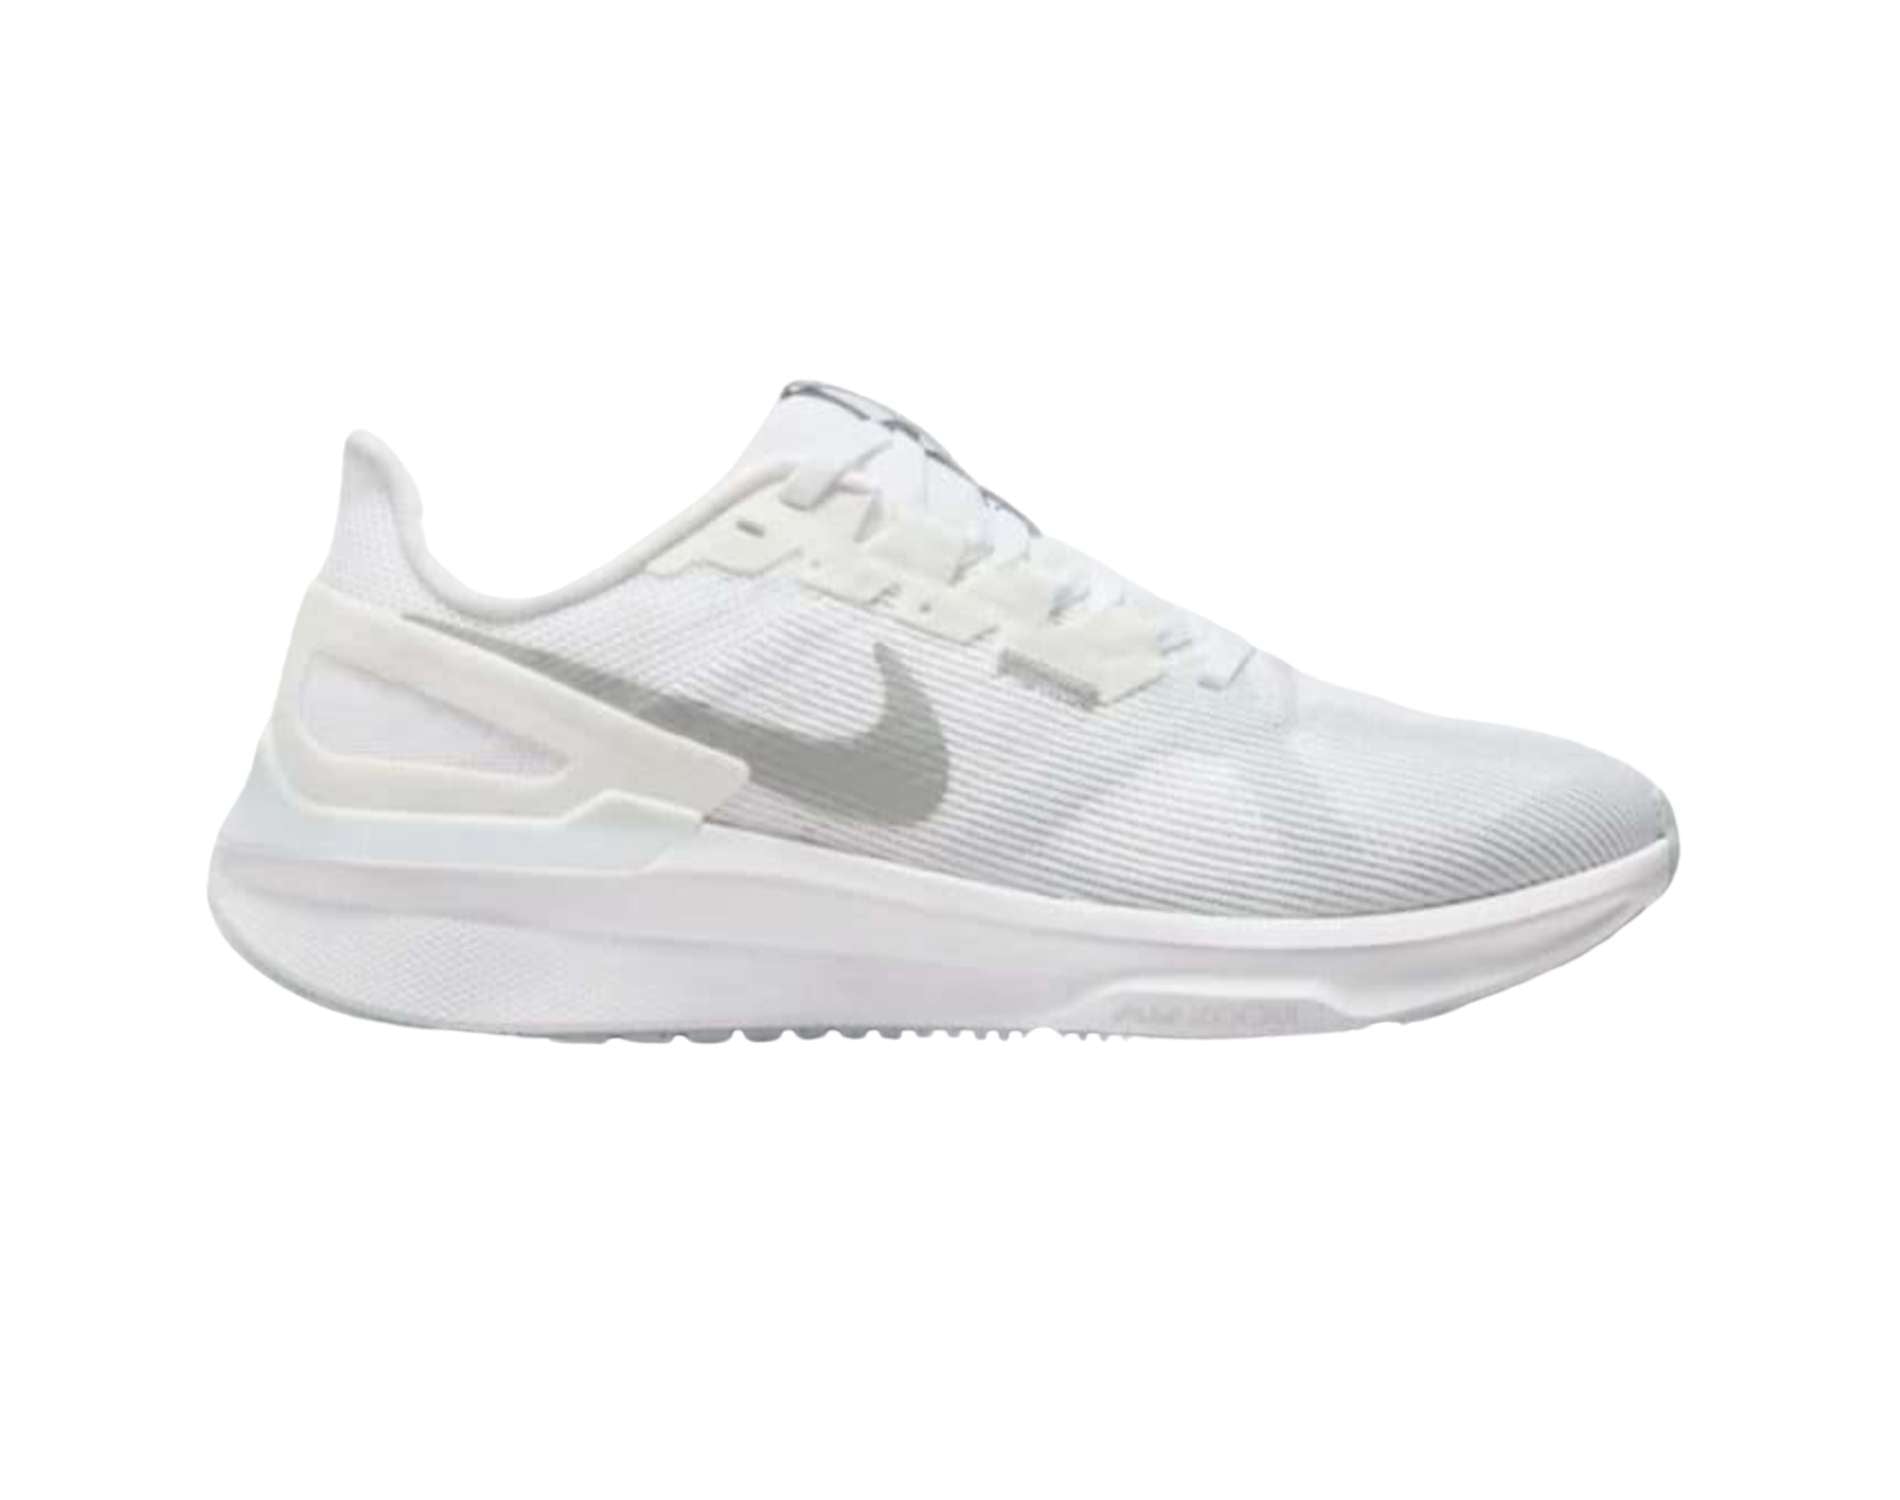 Nikes Zoom Structure 25 womens road running shoes in white pure silver platinum colour. SKU 7884101